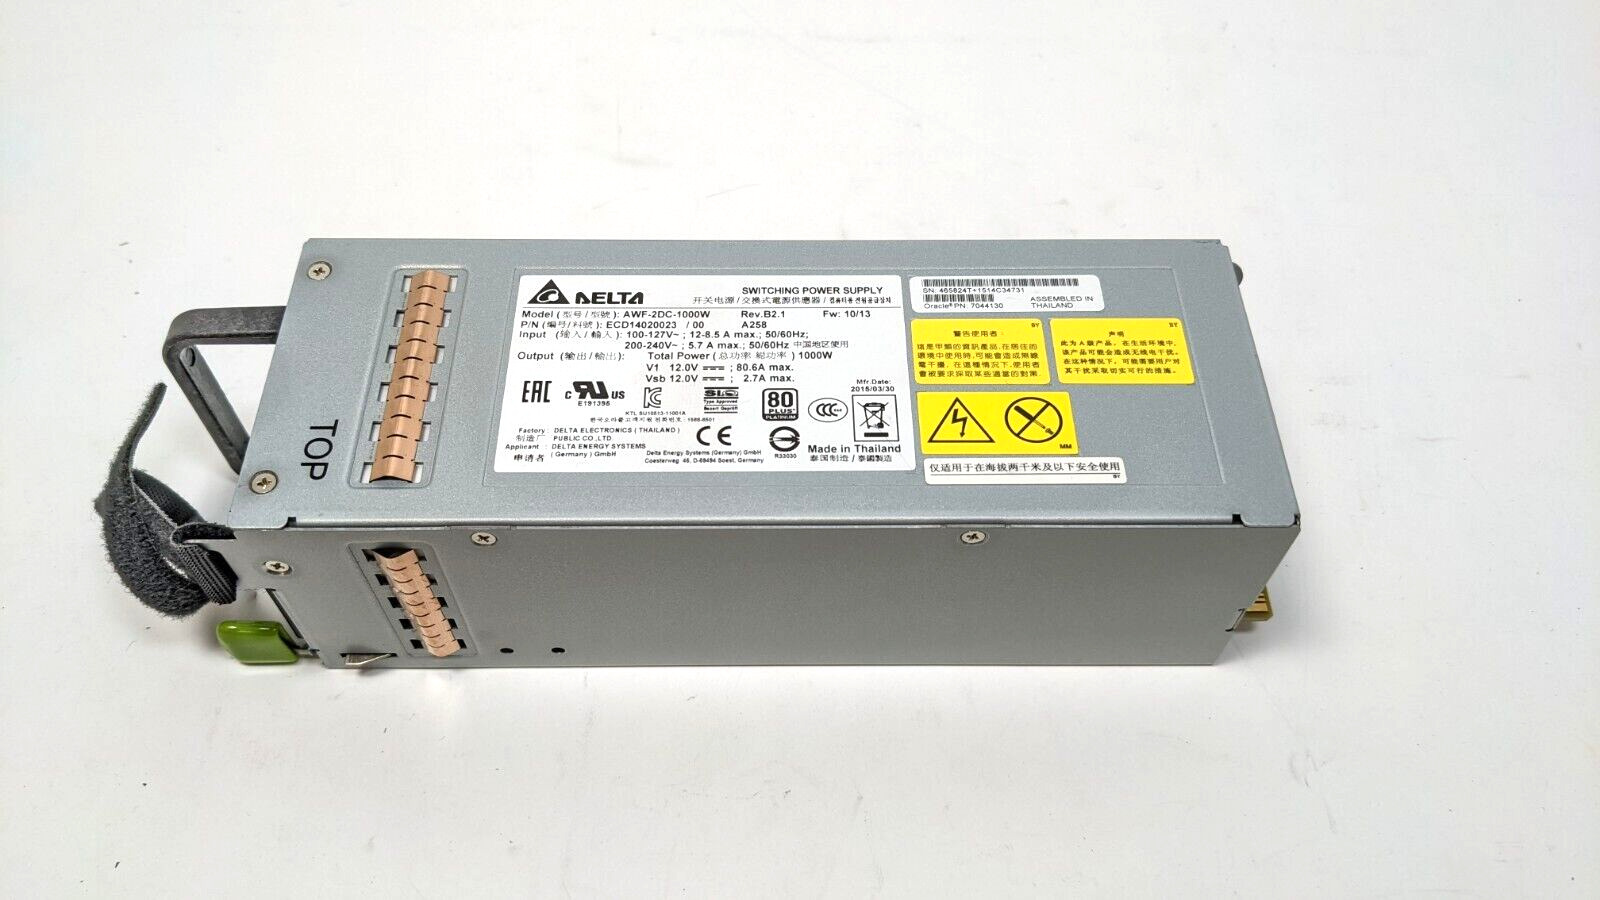 Brocade Delta Switching Power Supply AWF-2DC-1000W-E 23-0000142-02